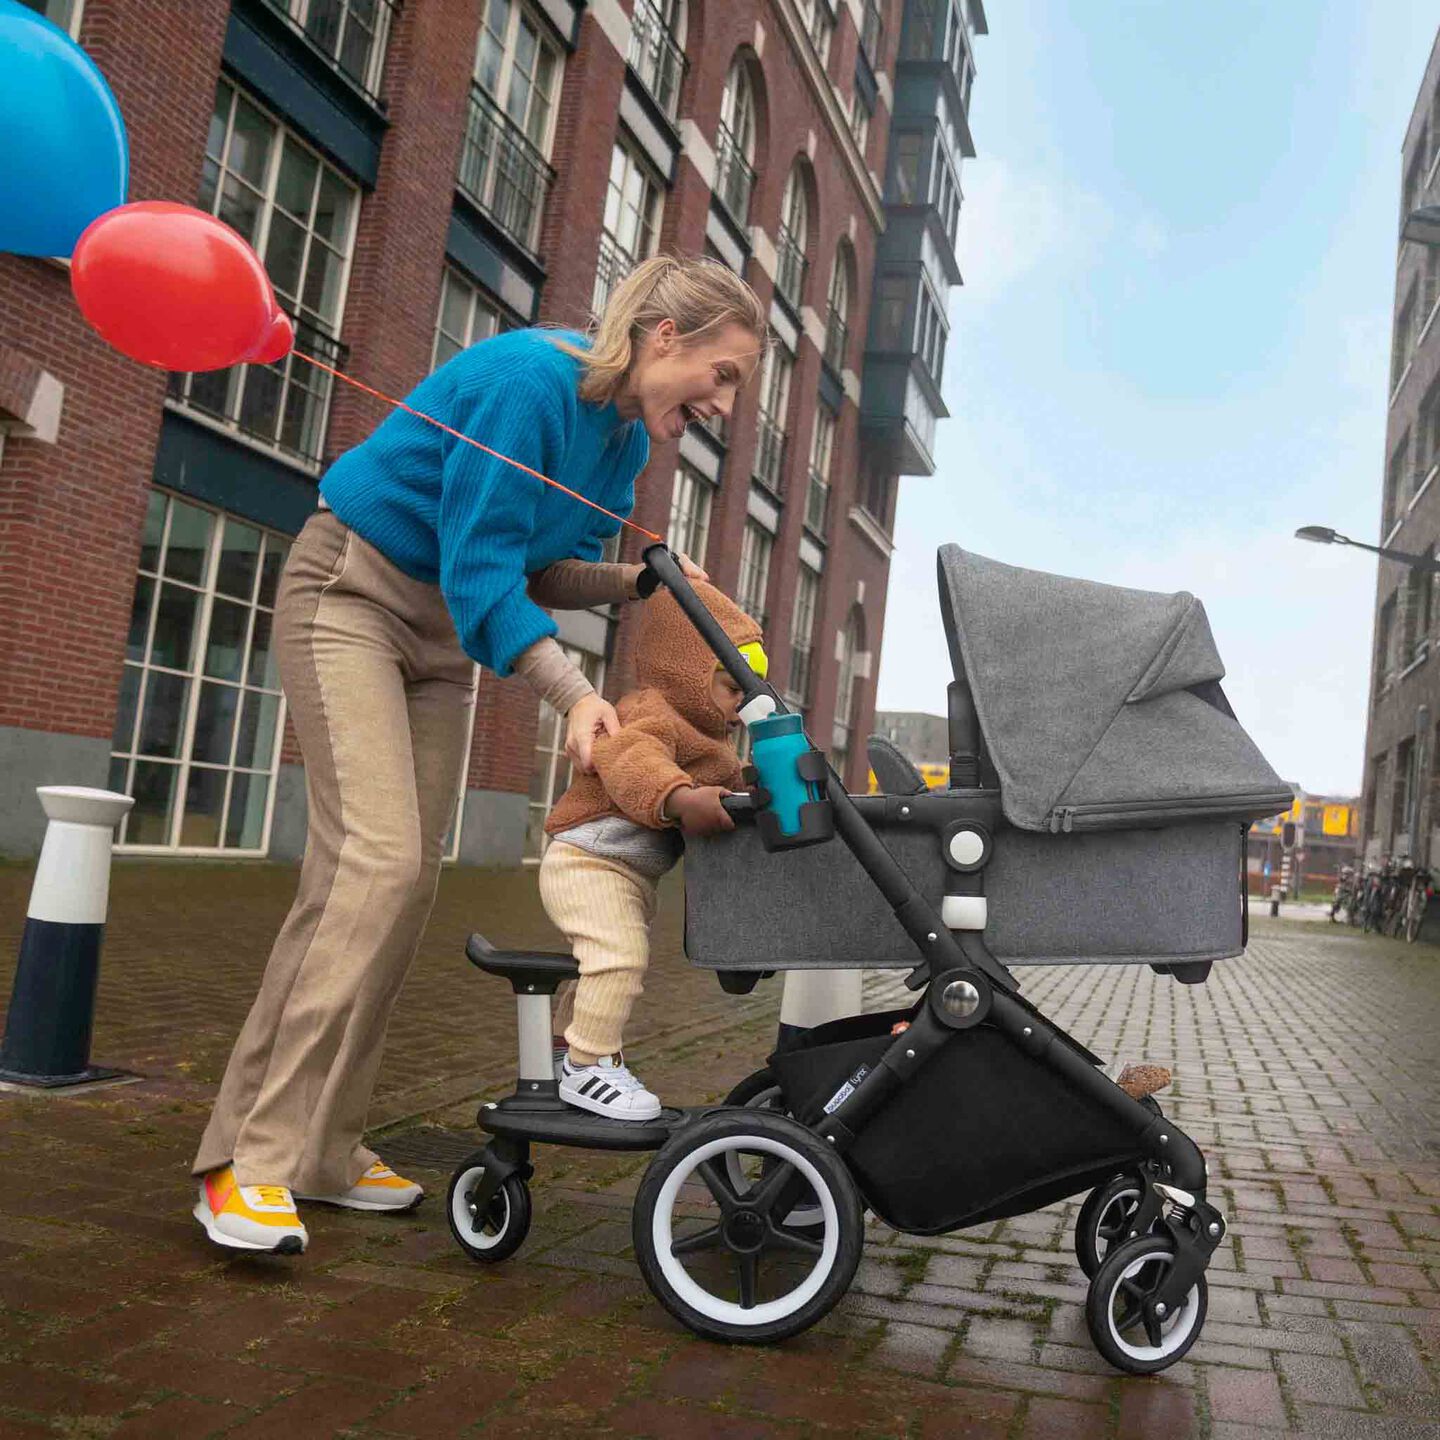 Woman with Lynx bassinet stroller and balloons